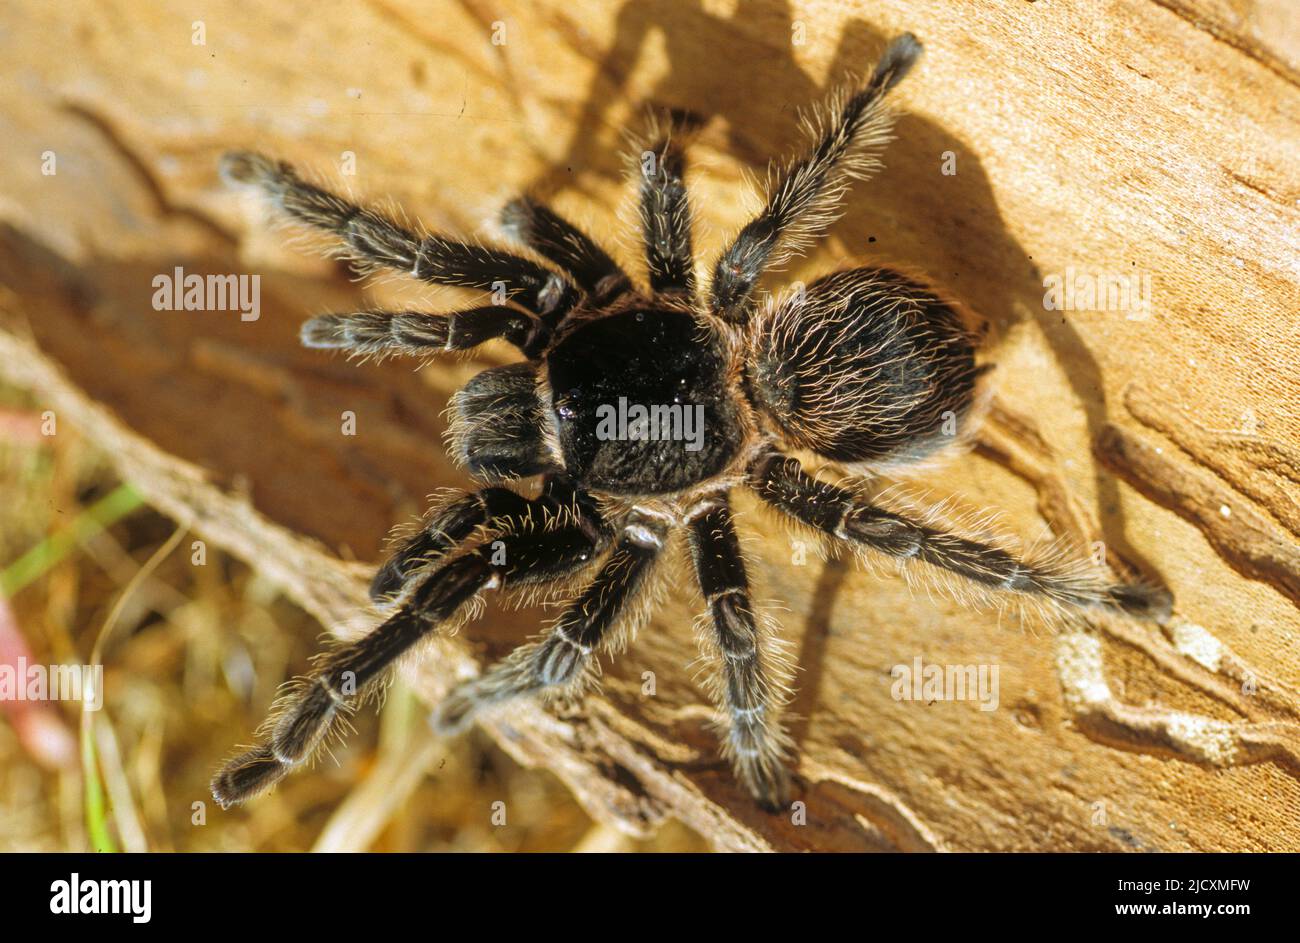 Tarantulas comprise a group of large and often hairy spiders of the family Theraphosidae. Stock Photo